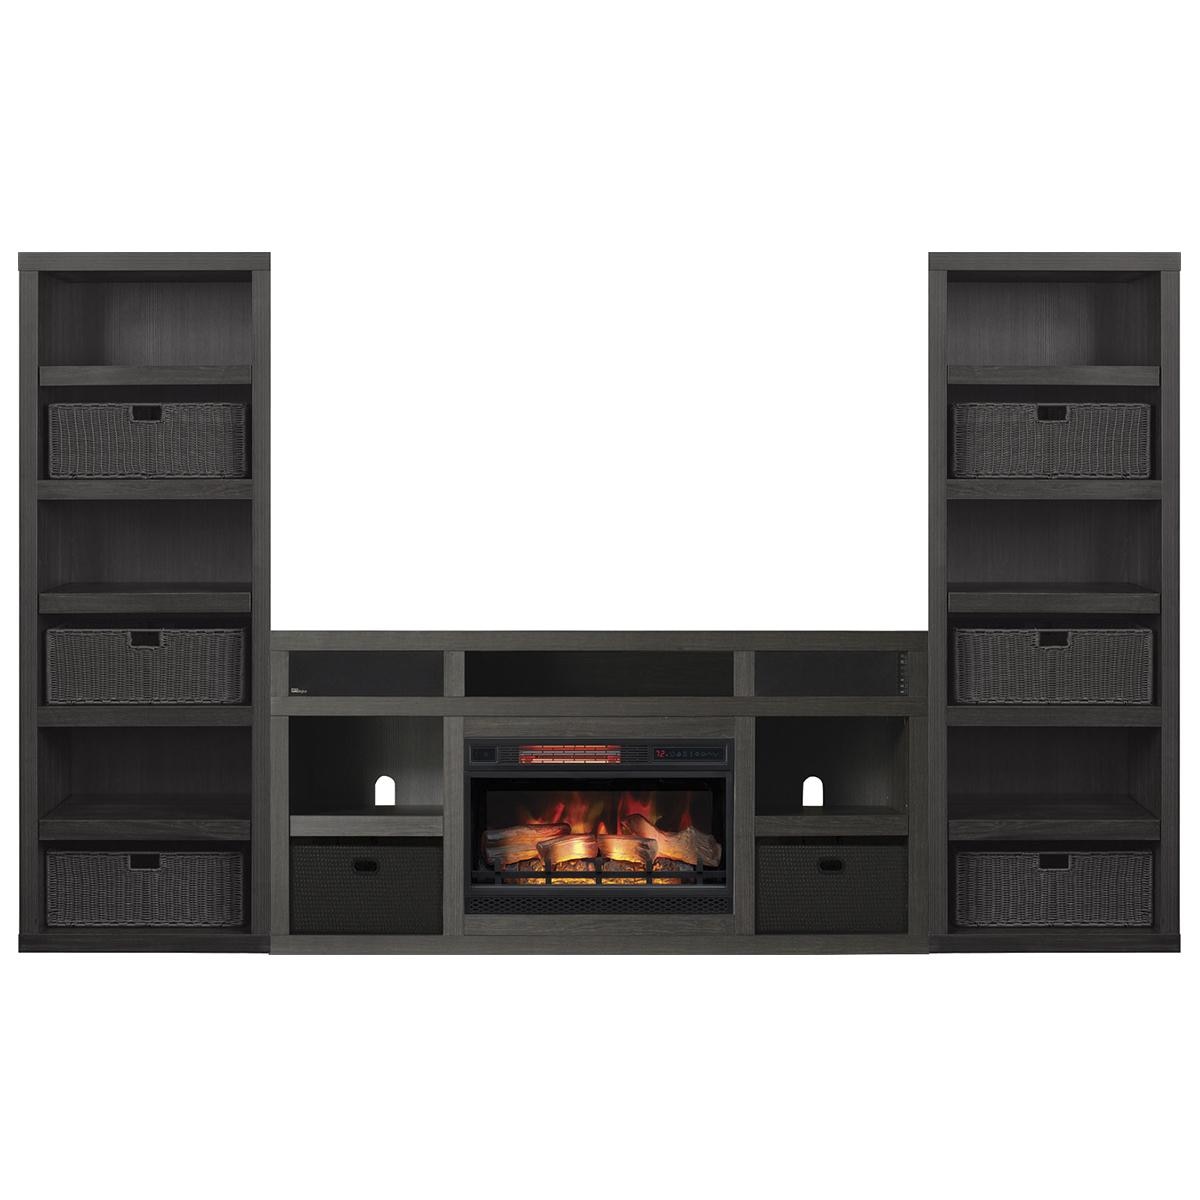 Cheap Entertainment Center with Fireplace Luxury Fabio Flames Greatlin 3 Piece Fireplace Entertainment Wall